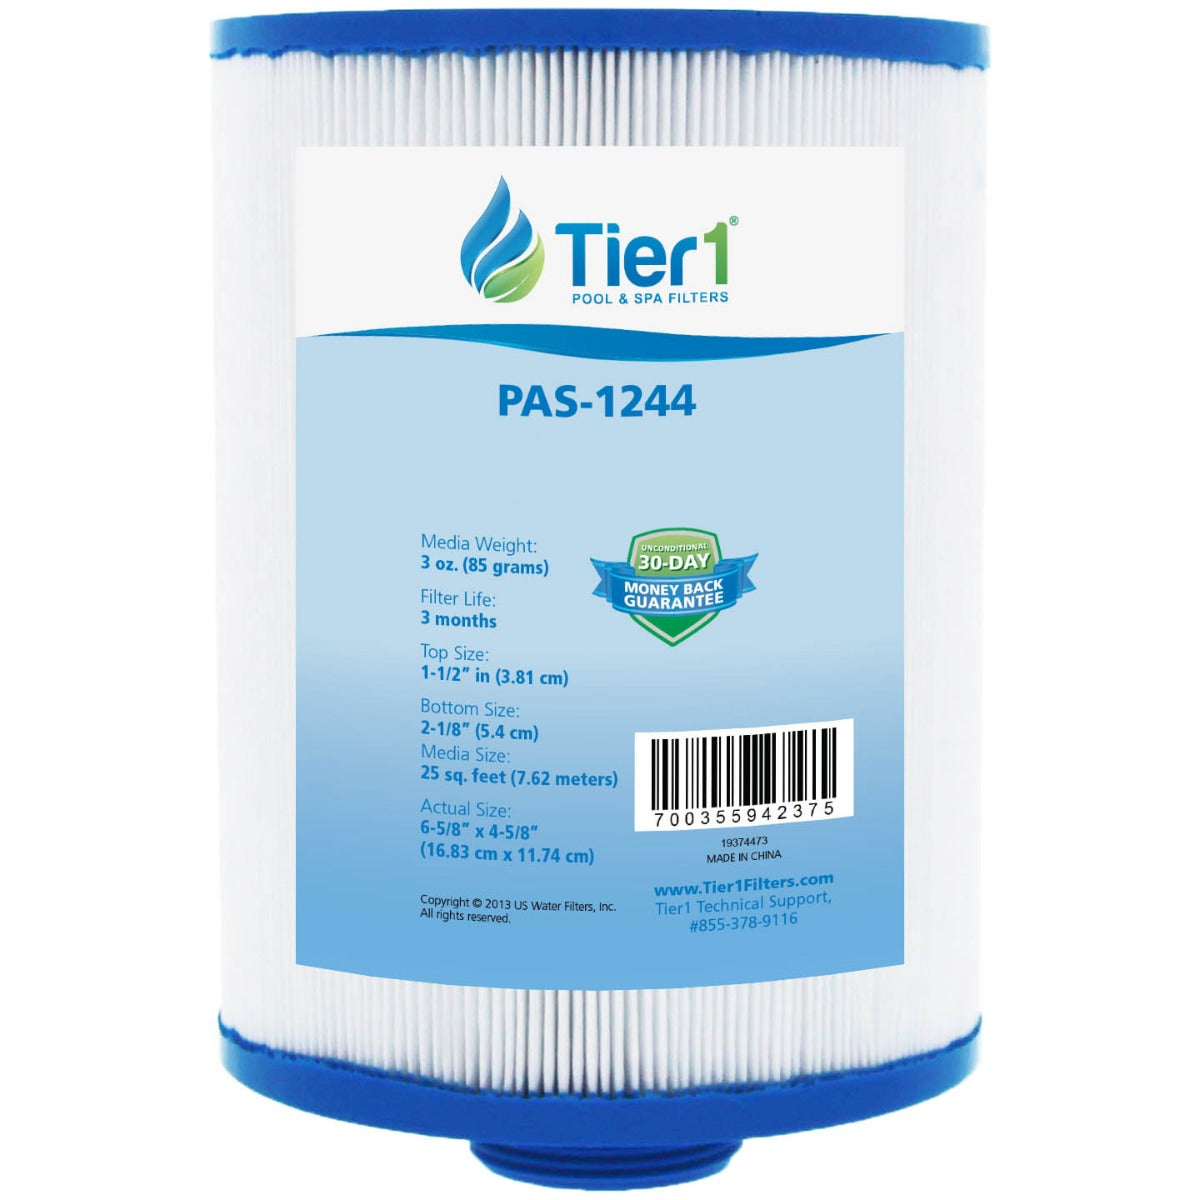 Tier1 PAS-1244 Replacement Pool and Spa Filter fits the Freeflow Lagas and CLX